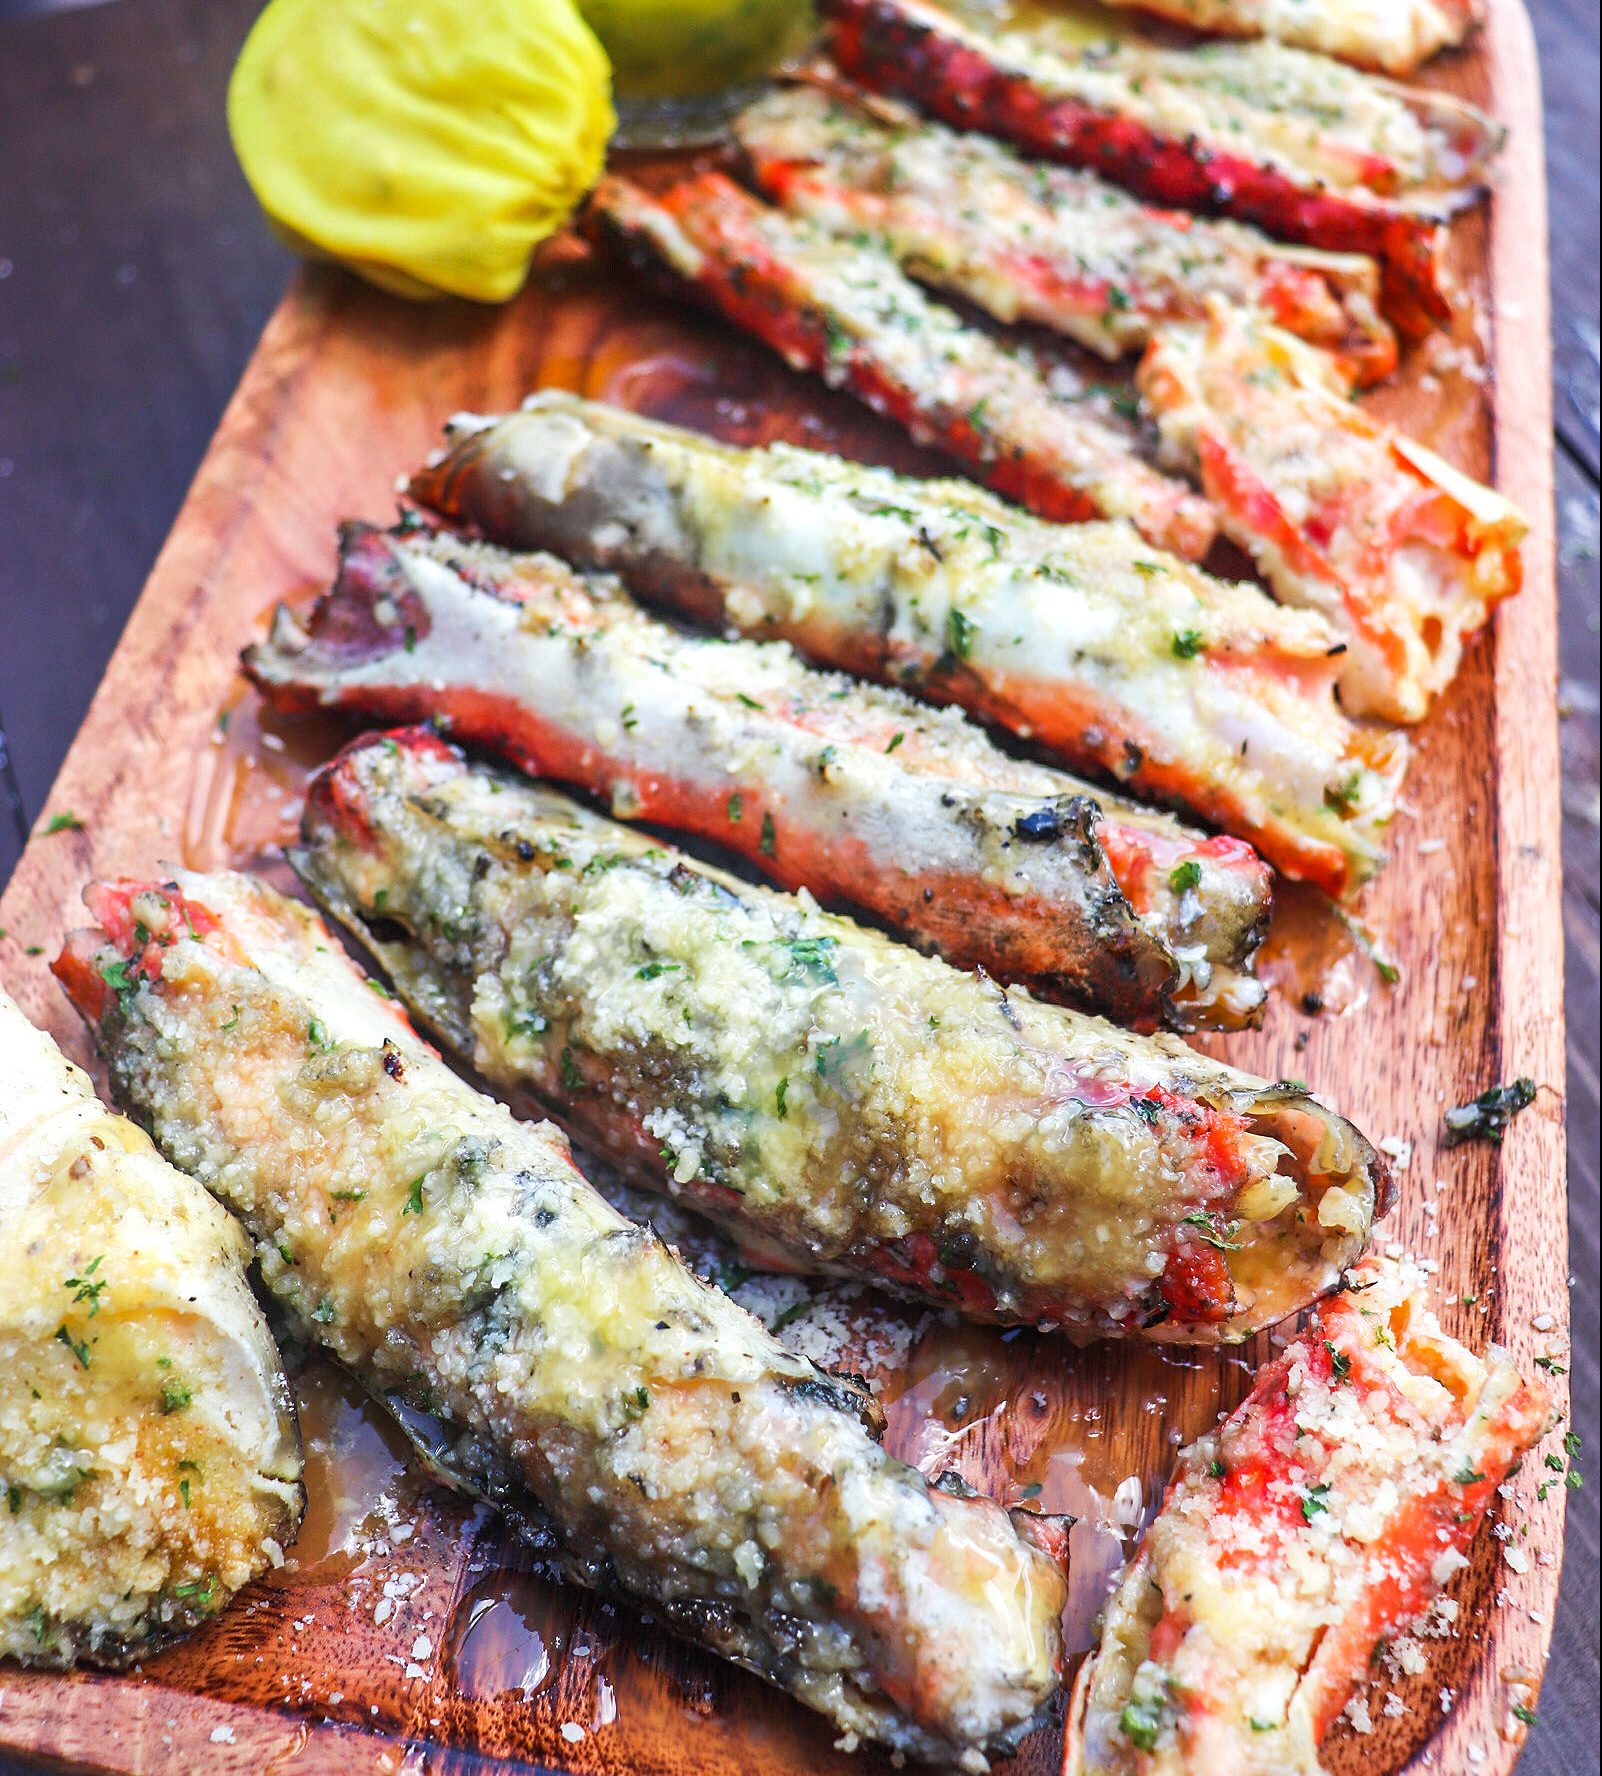 Chargrilled King Crab Legs